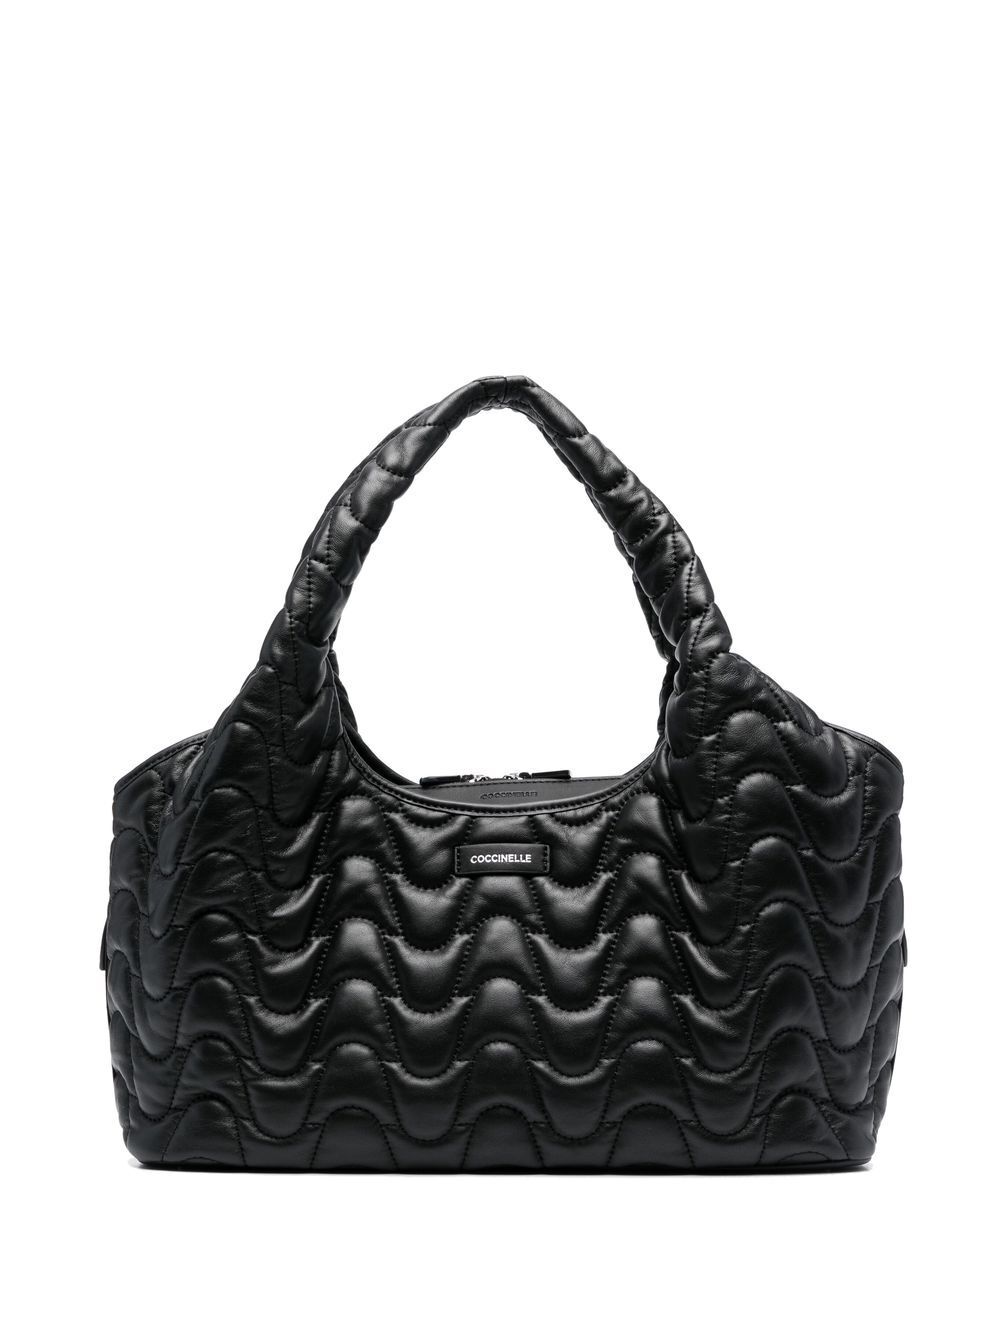 Coccinelle quilted leather tote bag - Black